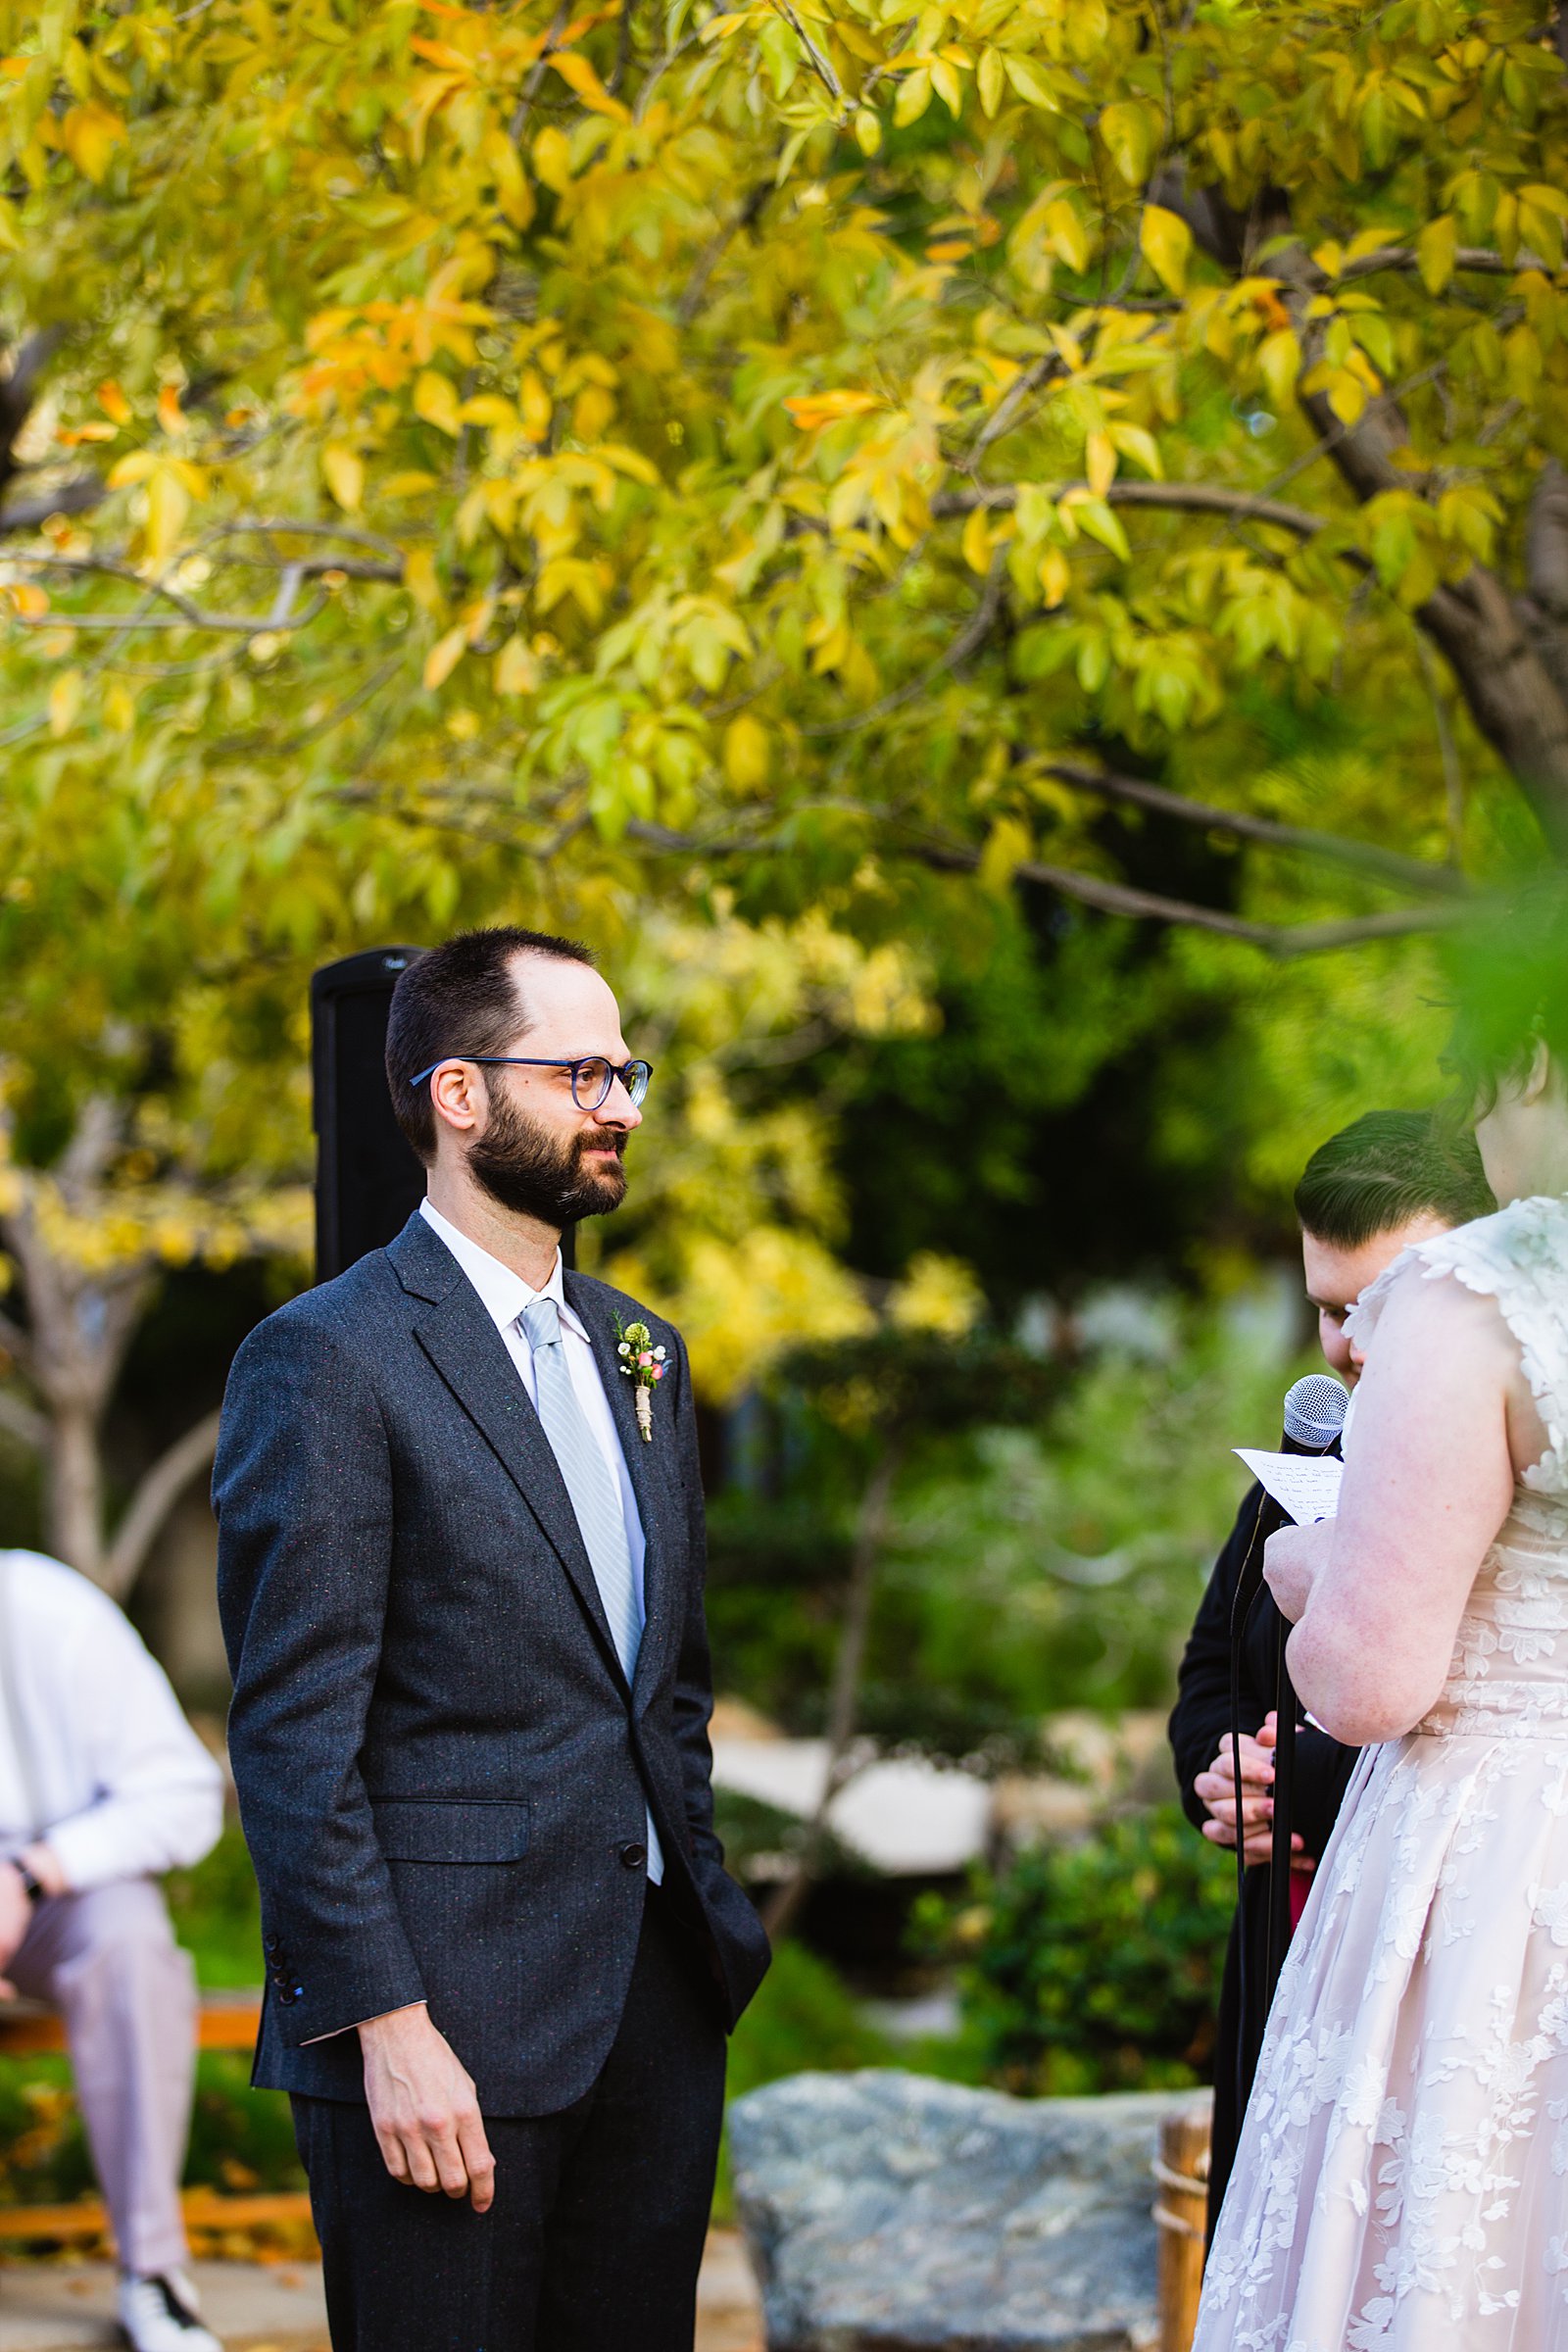 Groom looking at his bride during their wedding ceremony at Japanese Friendship Garden by Phoenix wedding photographer PMA Photography.